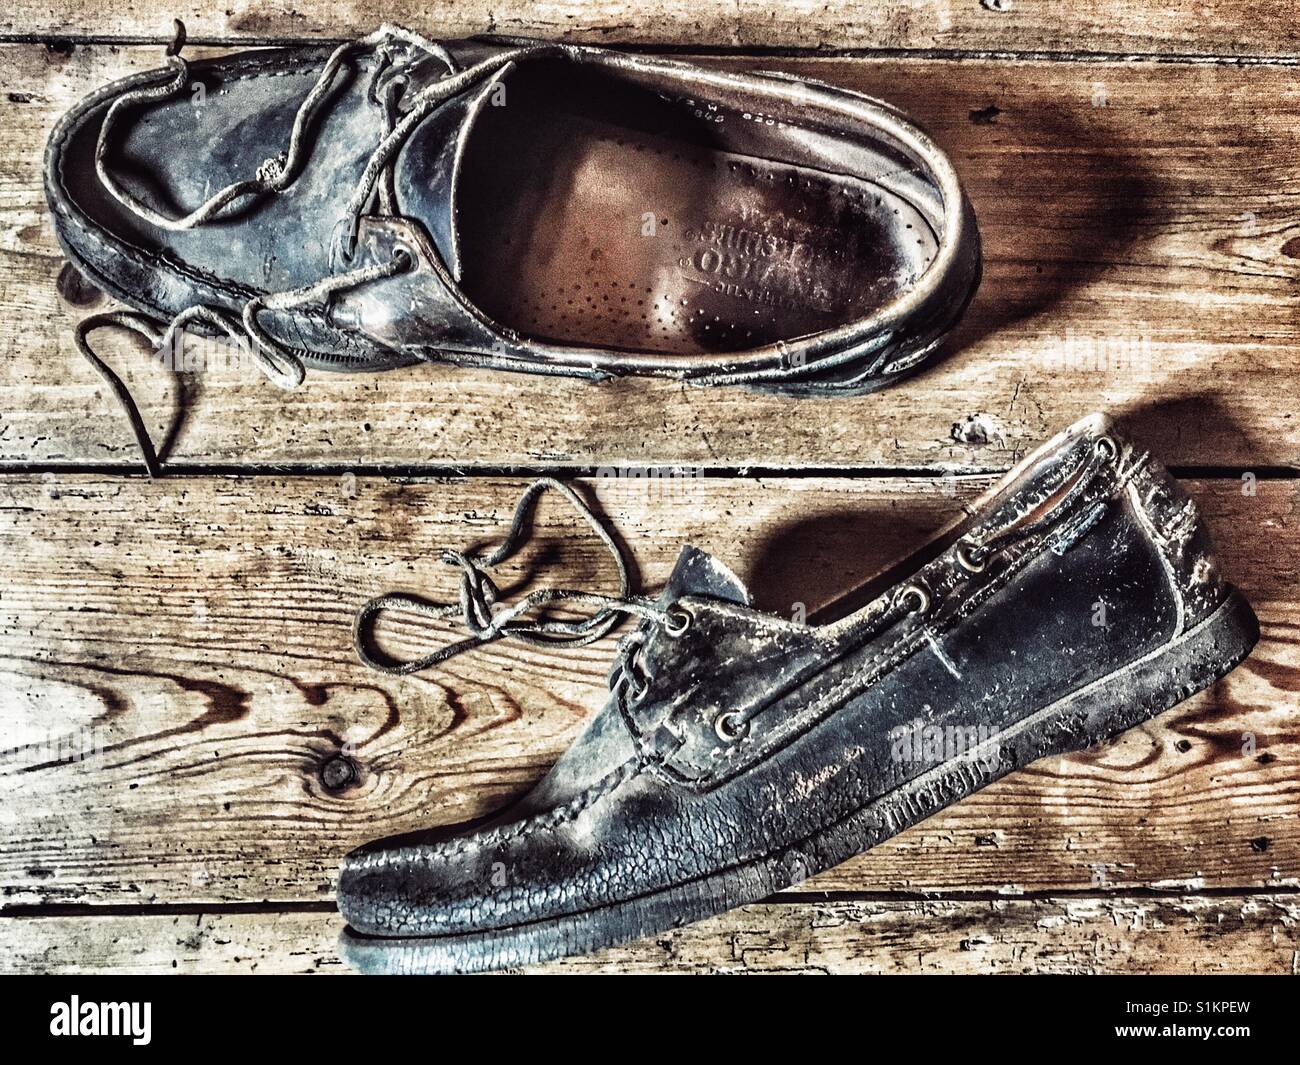 22 Year Old Shoes High Resolution Stock Photography and Images - Alamy